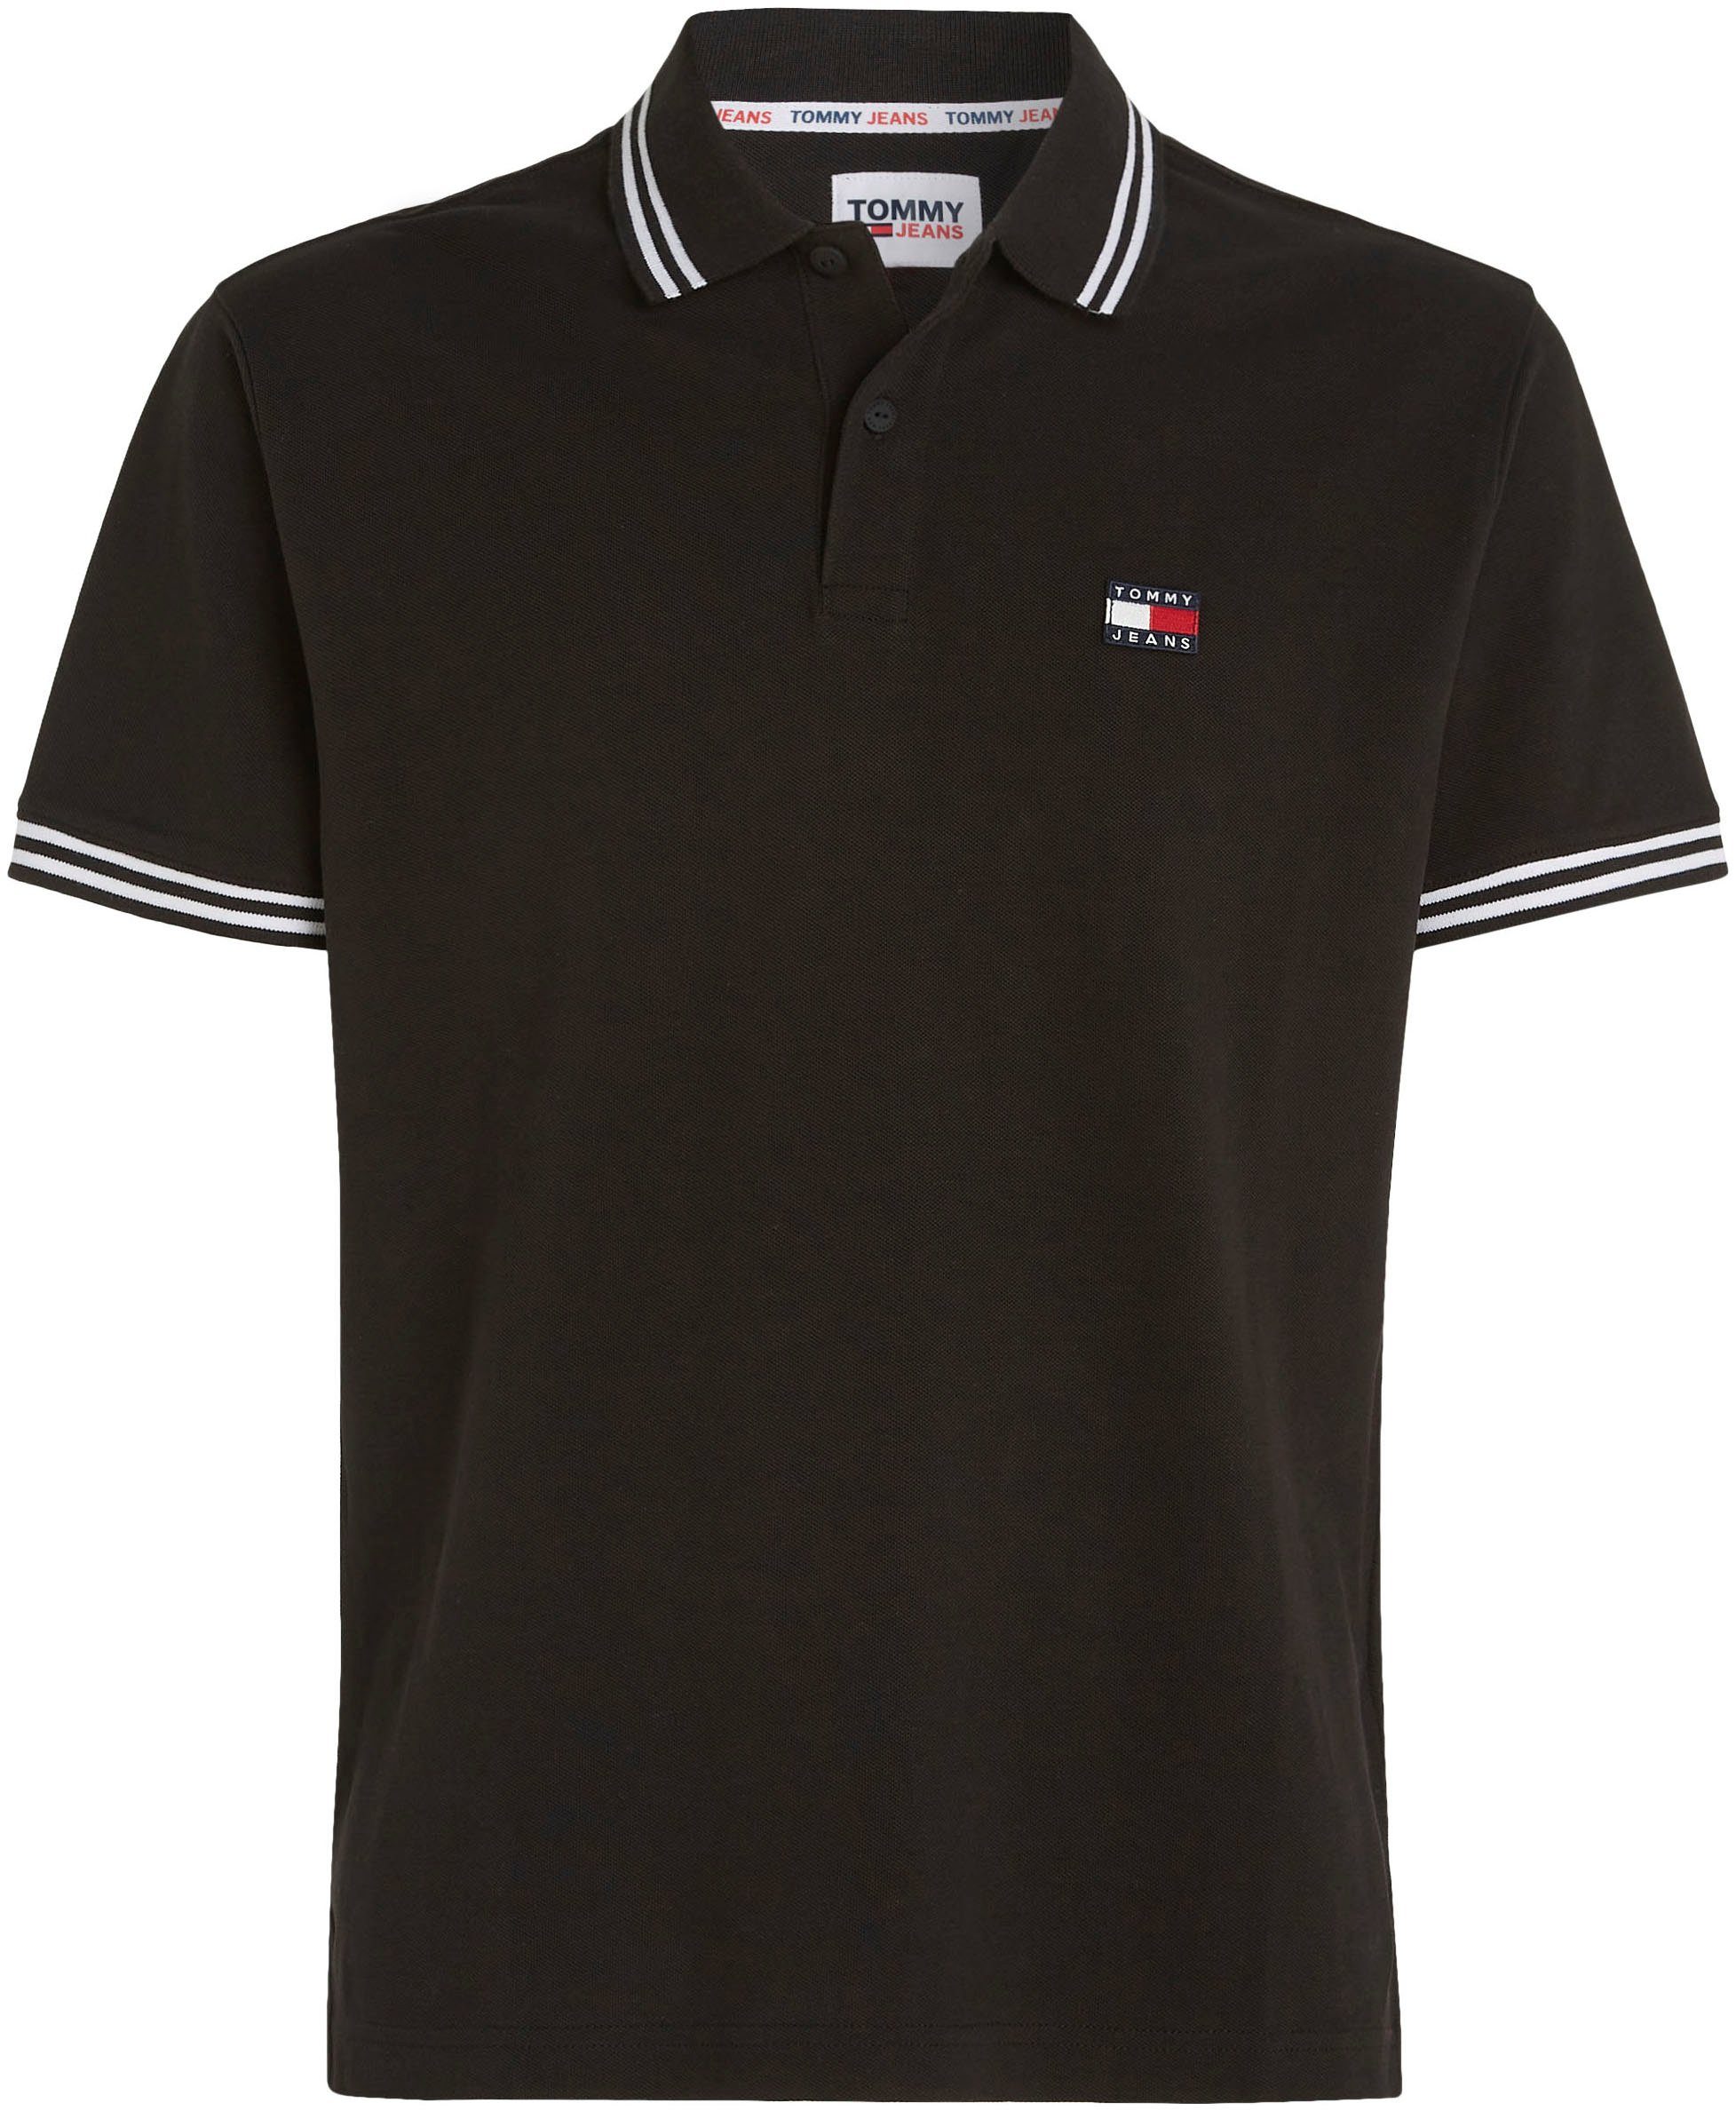 CLSC Tommy POLO TIPPING Black Jeans Poloshirt DETAIL TJM